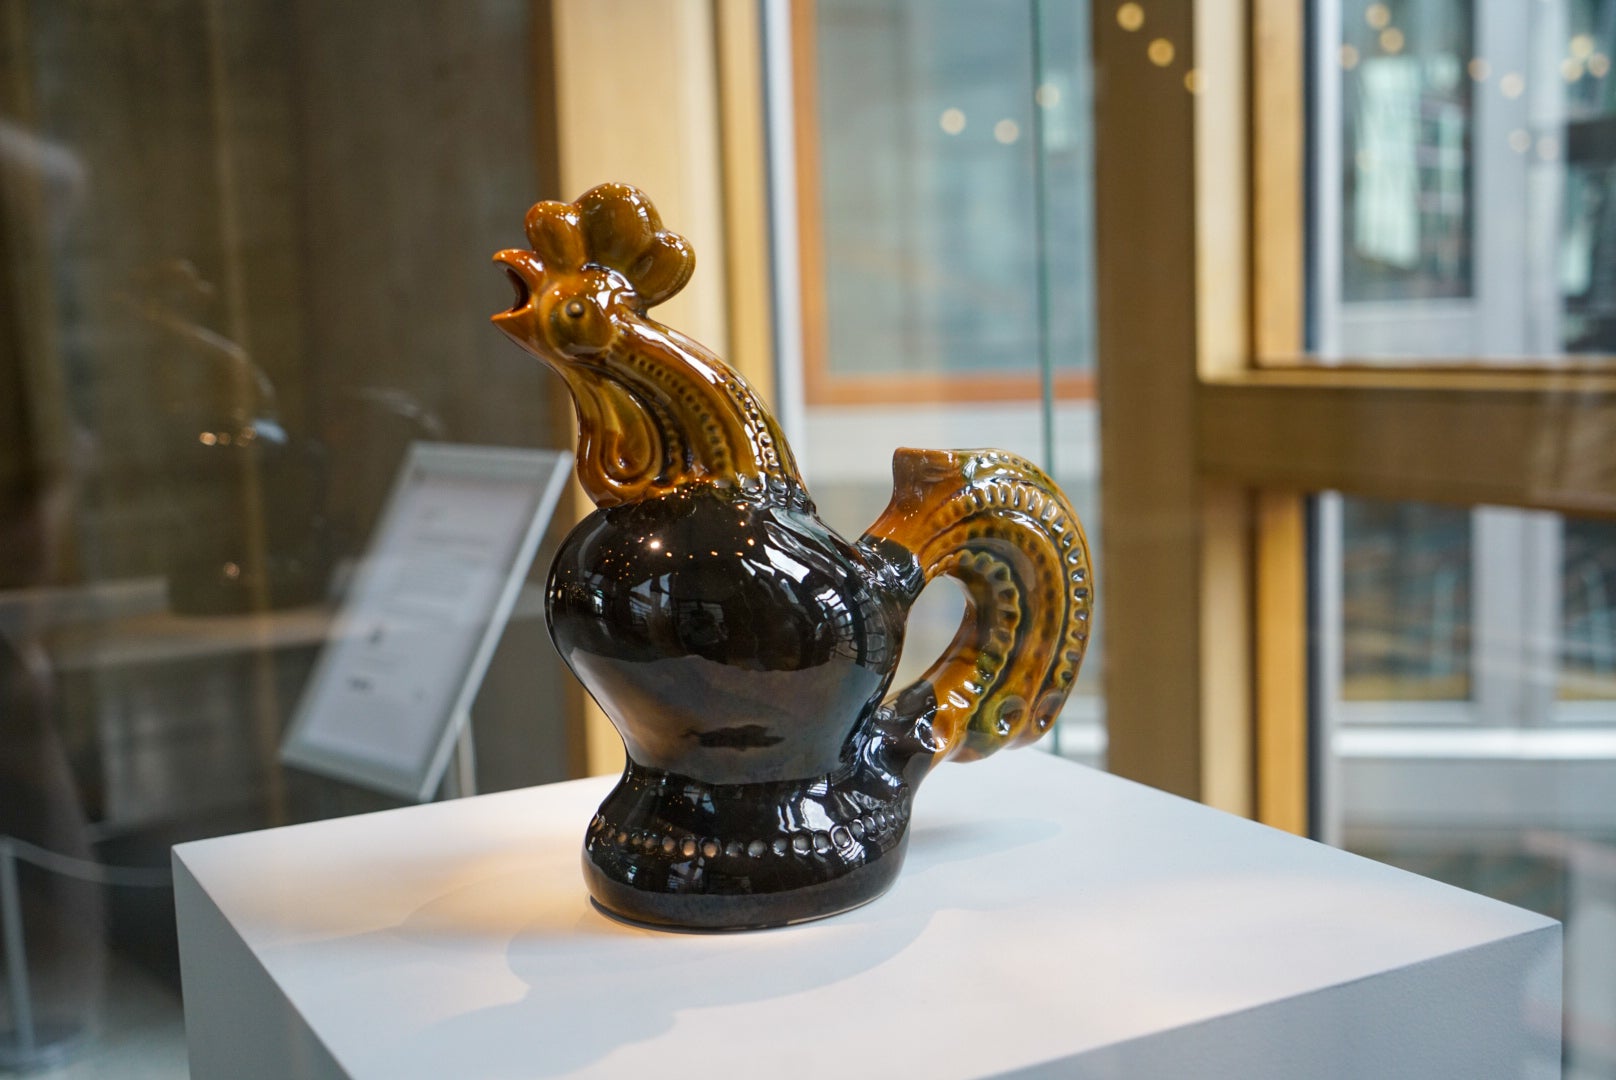 Ukrainian cockerel jug on display at the Scottish Parliament. It was handed to Boris Johnson during his walkabout in Kyiv in April 2022. (Scotland Office)